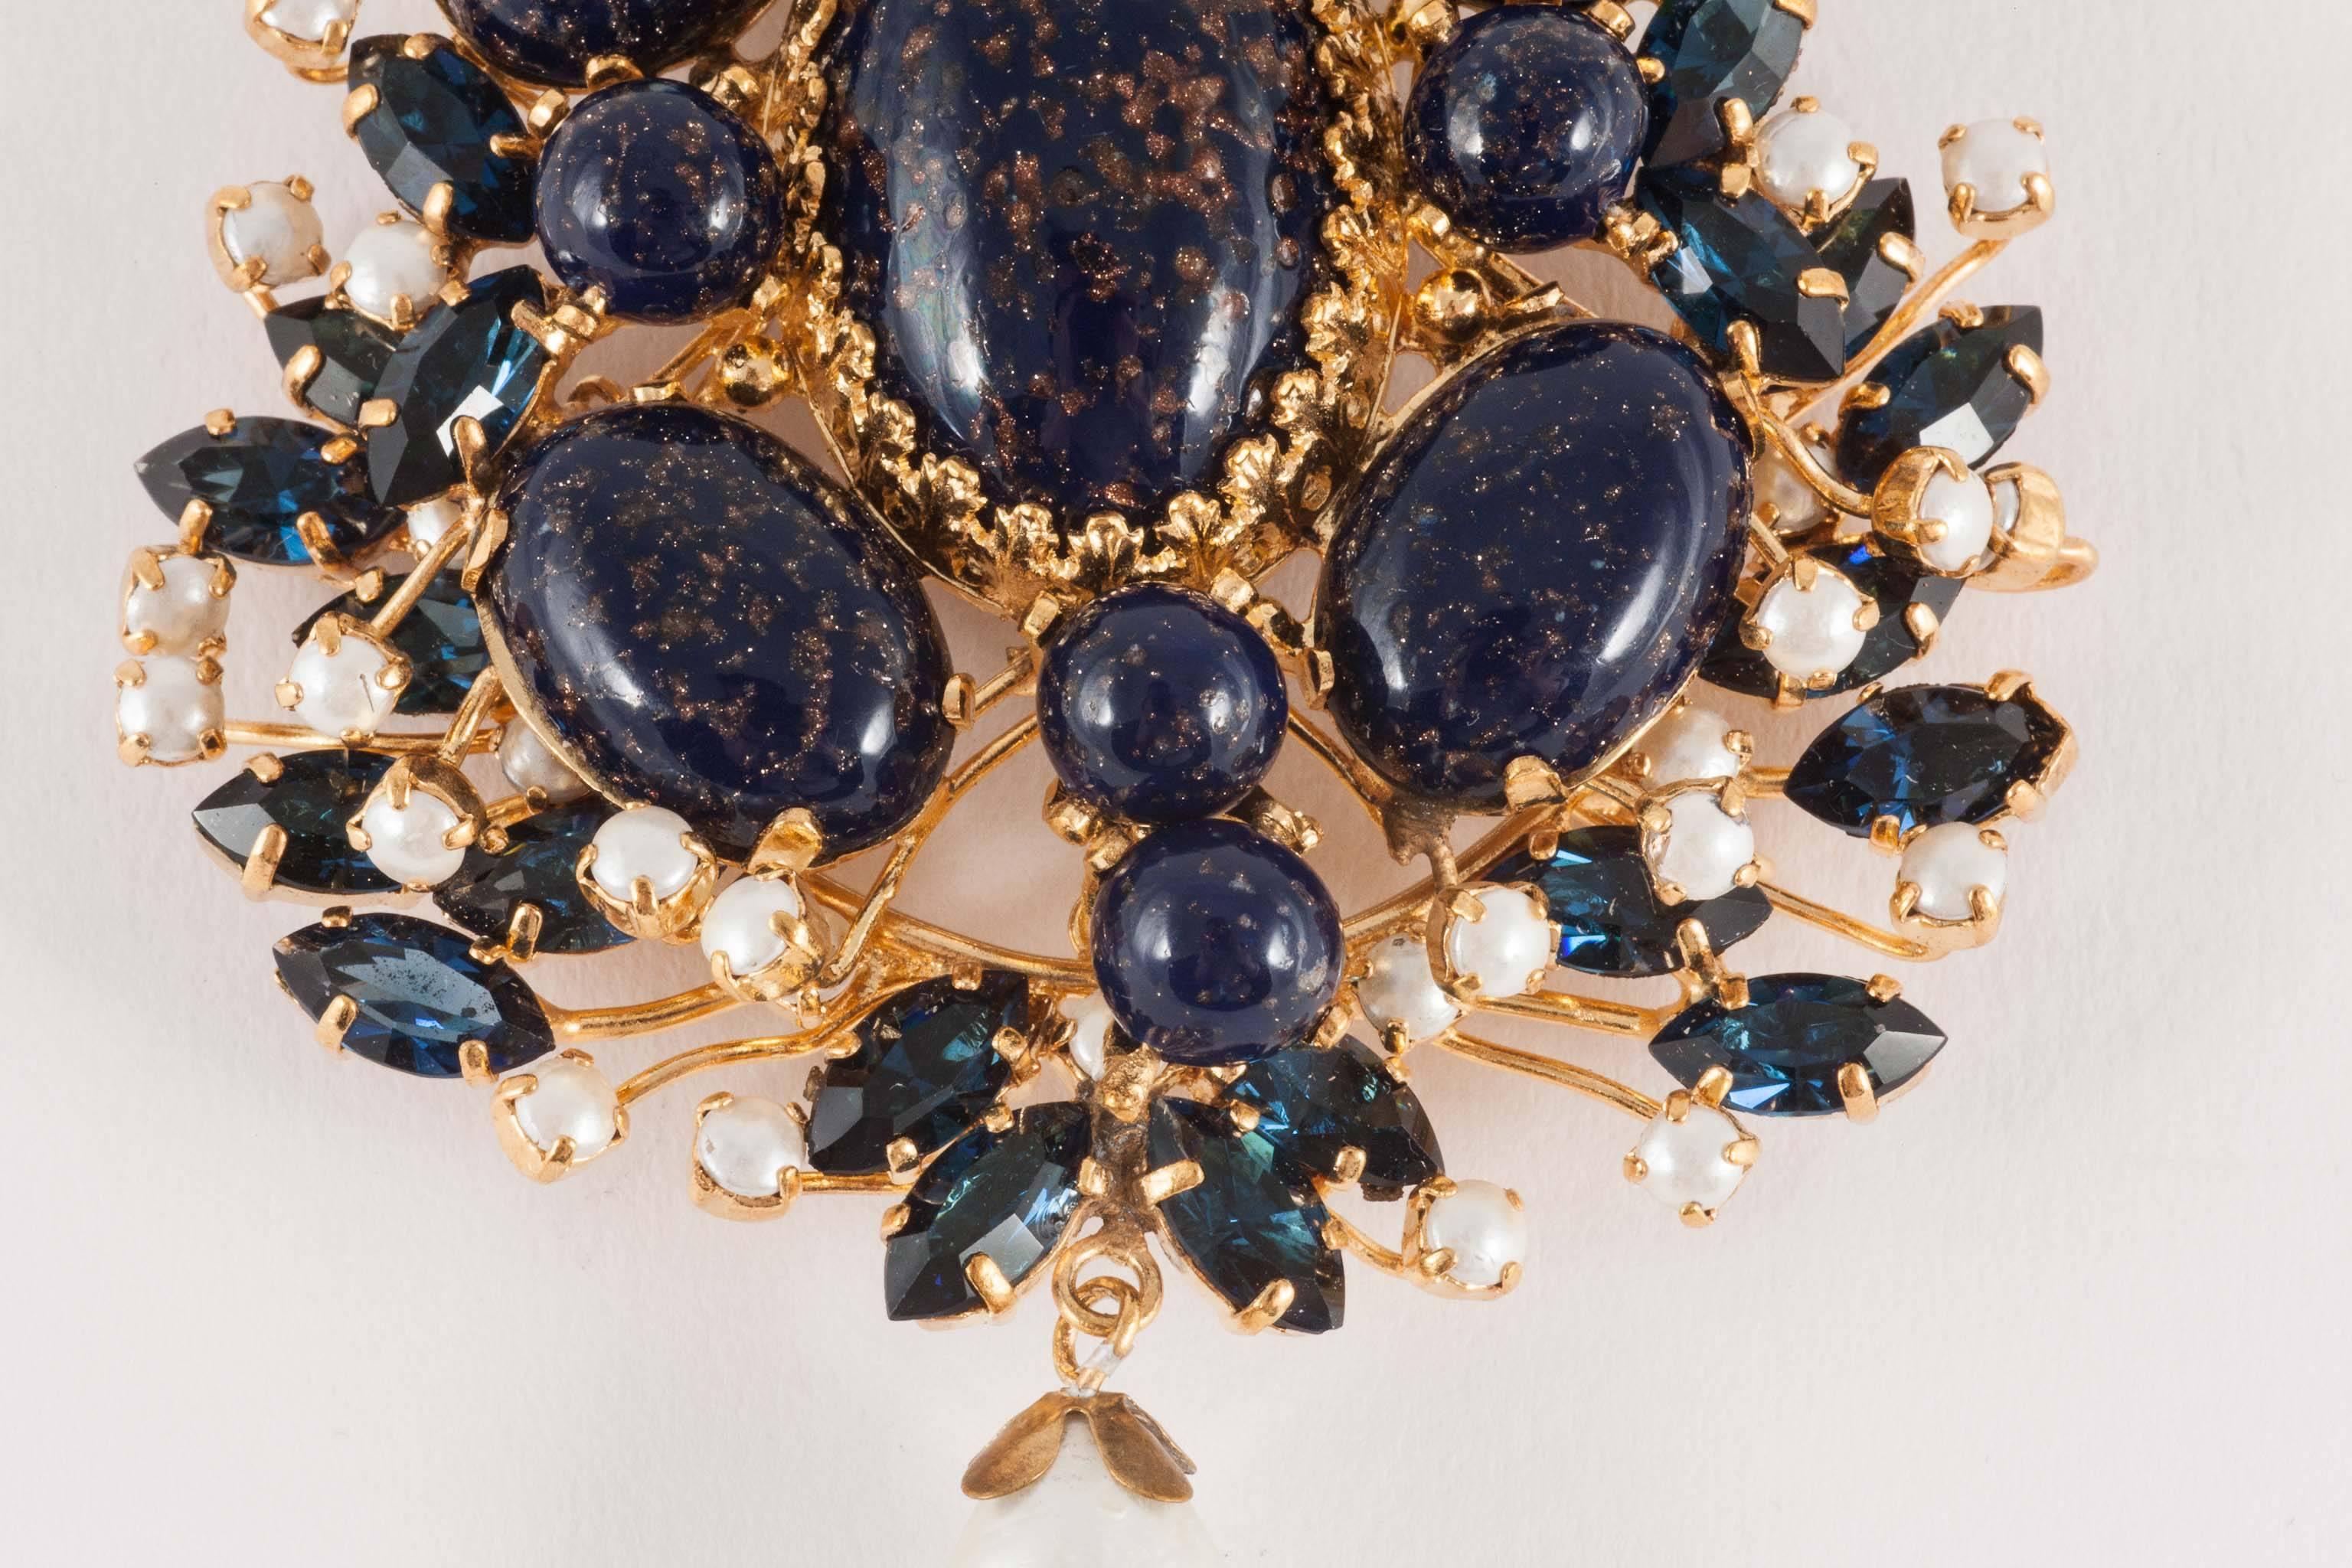 An exquisite handmade poured glass, paste and pearl brooch by Maison Gripoix, from the 1960s. Although not attributed to any design house, this could be a piece made for Christian Dior or one of the other couture houses. the poured glass imitates